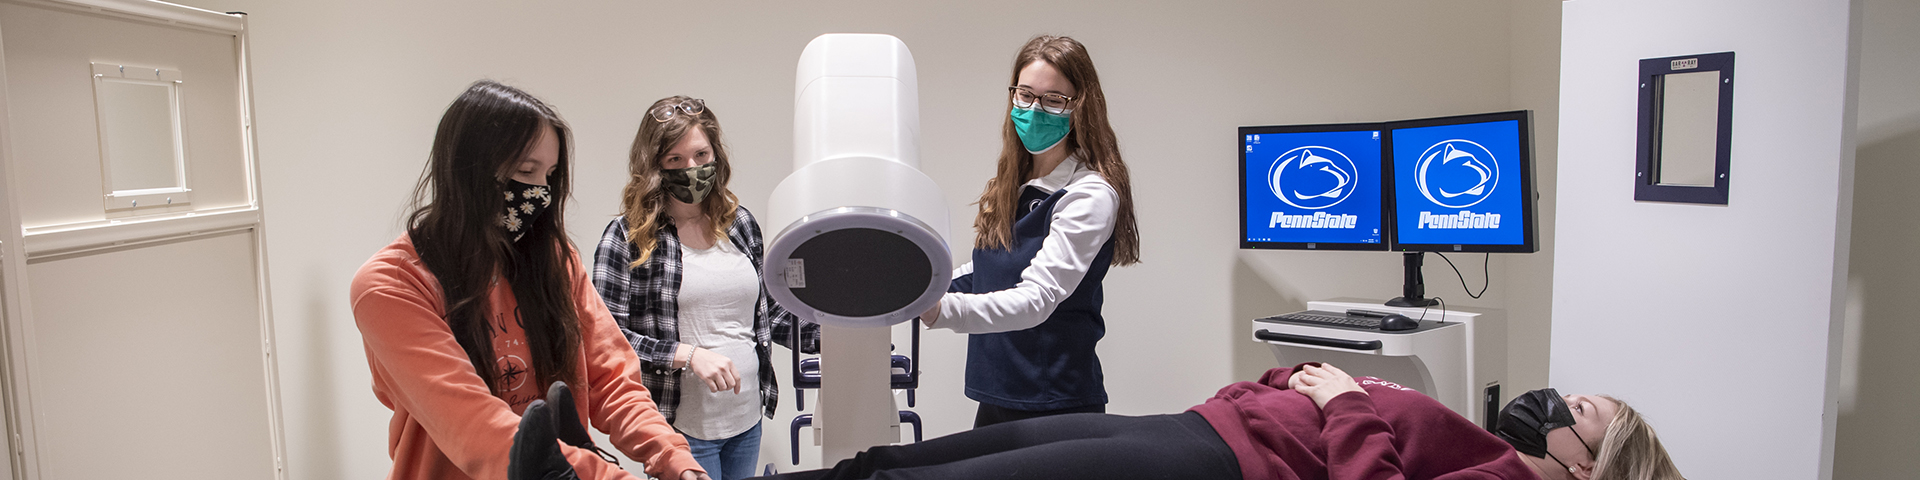 Radiological Sciences students working in their on-campus X-ray lab